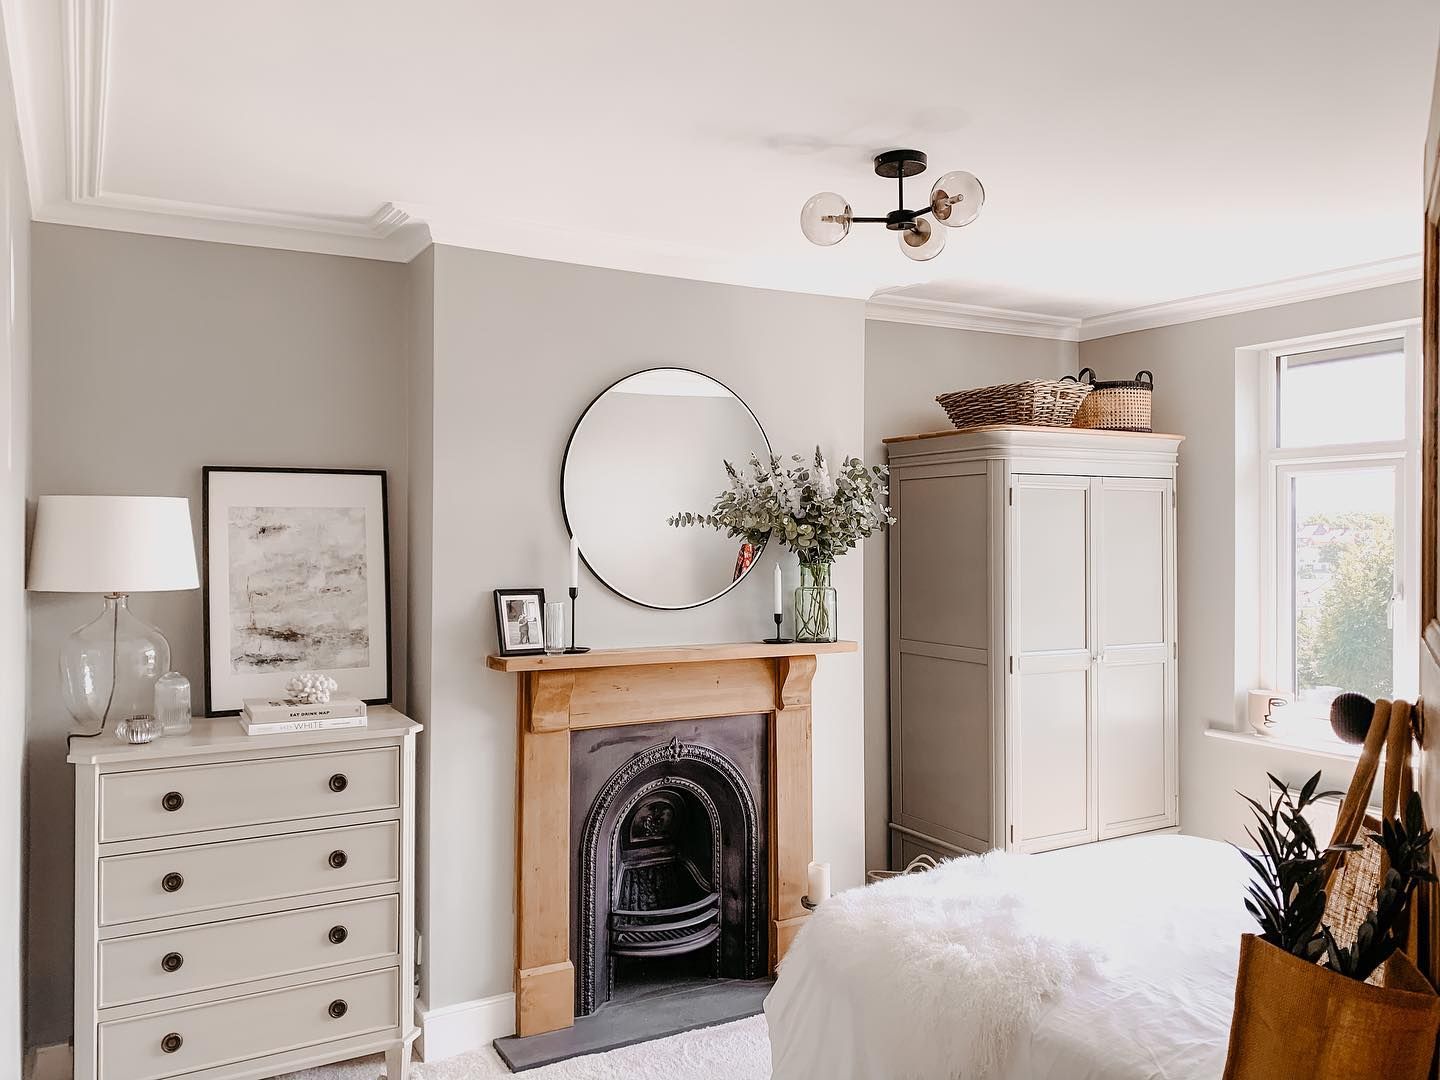 Best Wardrobes For Small Bedrooms | Oak Furnitureland Blog For Small Wardrobes (View 5 of 14)